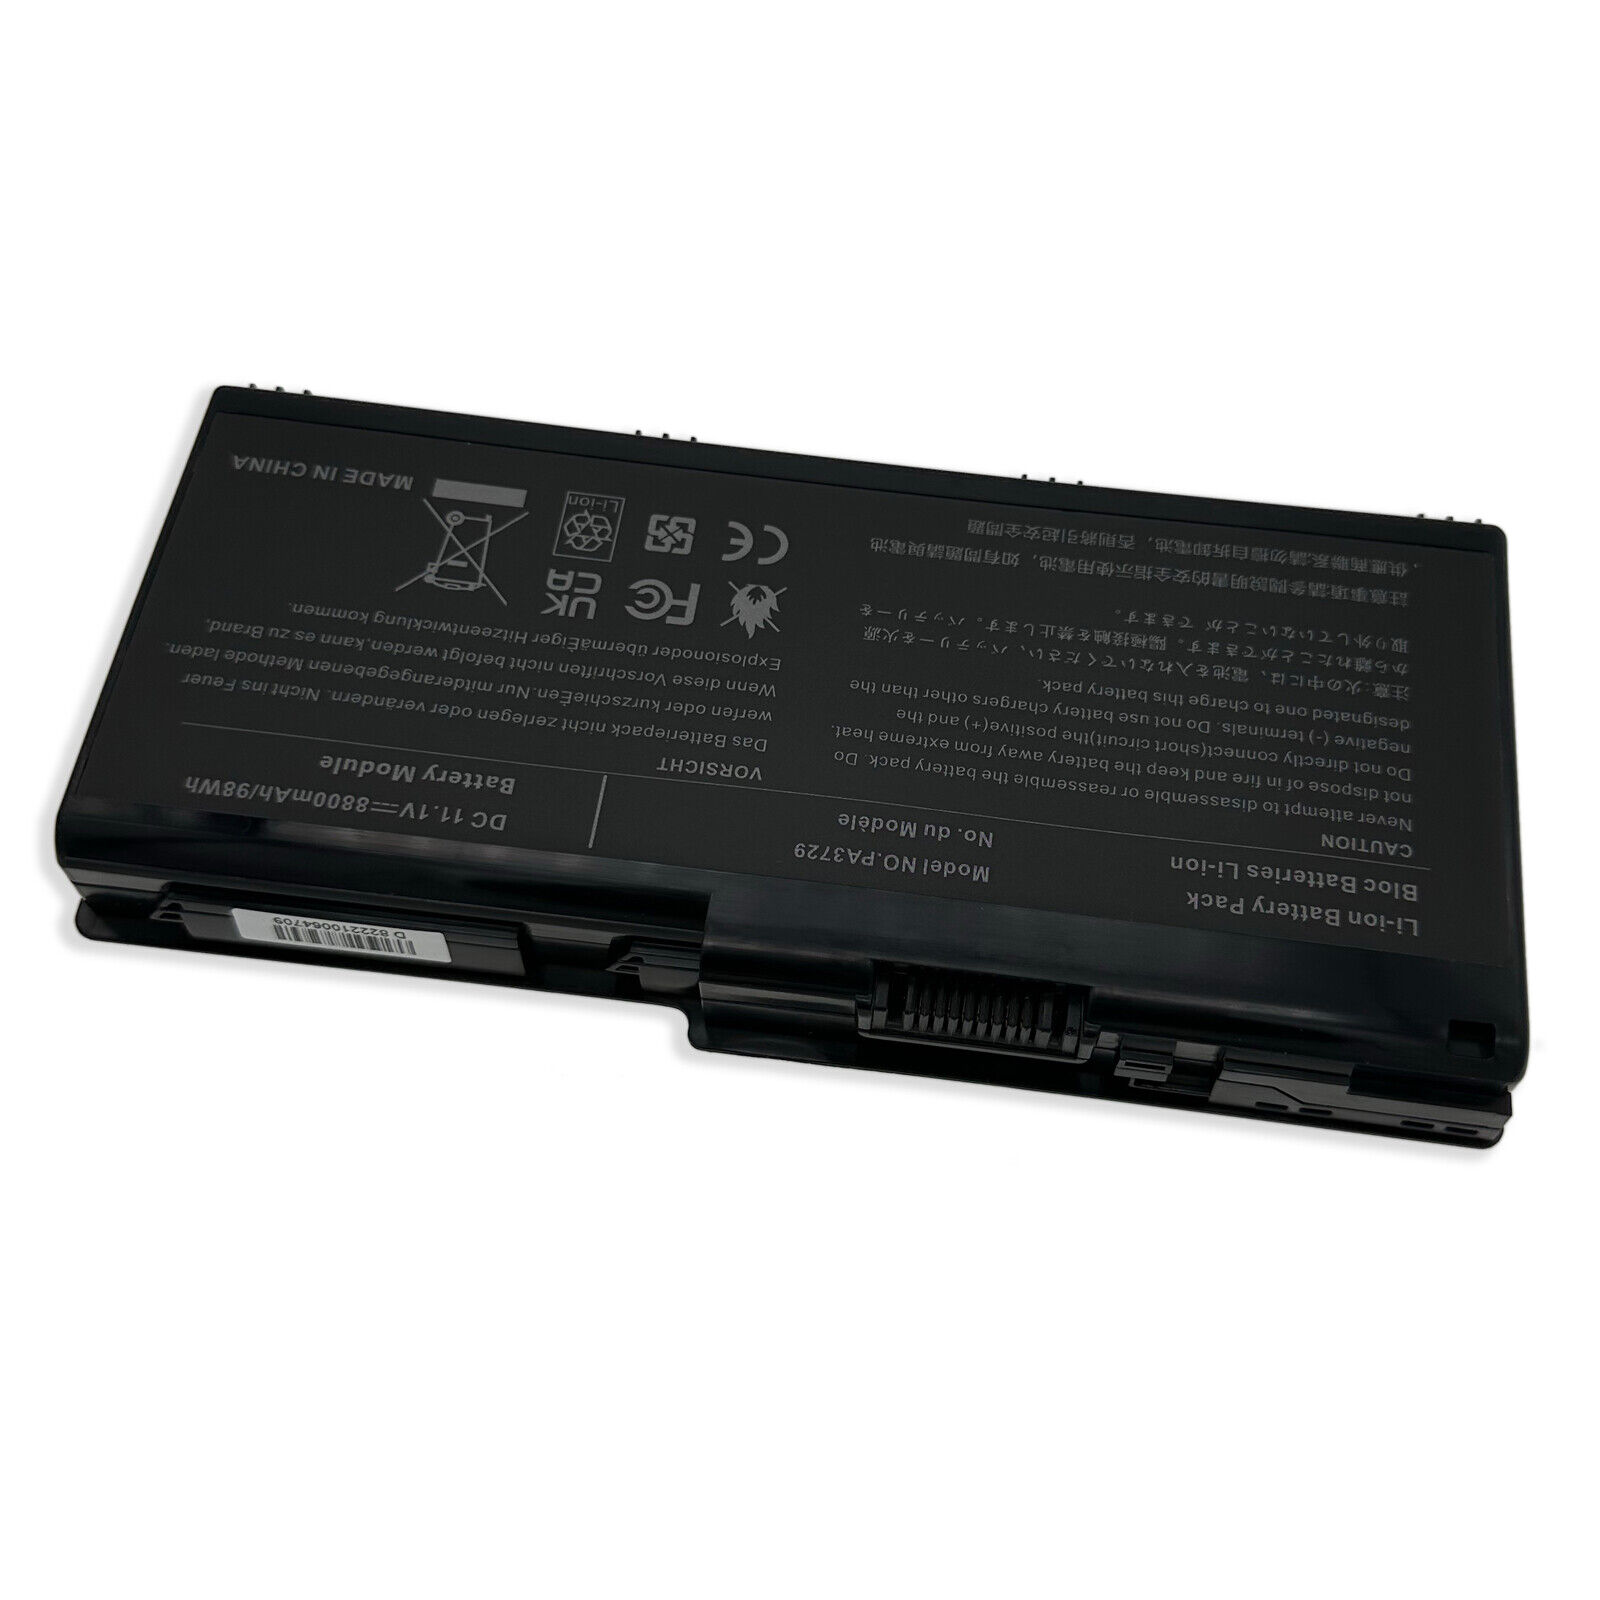 New 12Cell Laptop Battery For Toshiba Satellite P505-S8980 P505-S8971 P505-S8970